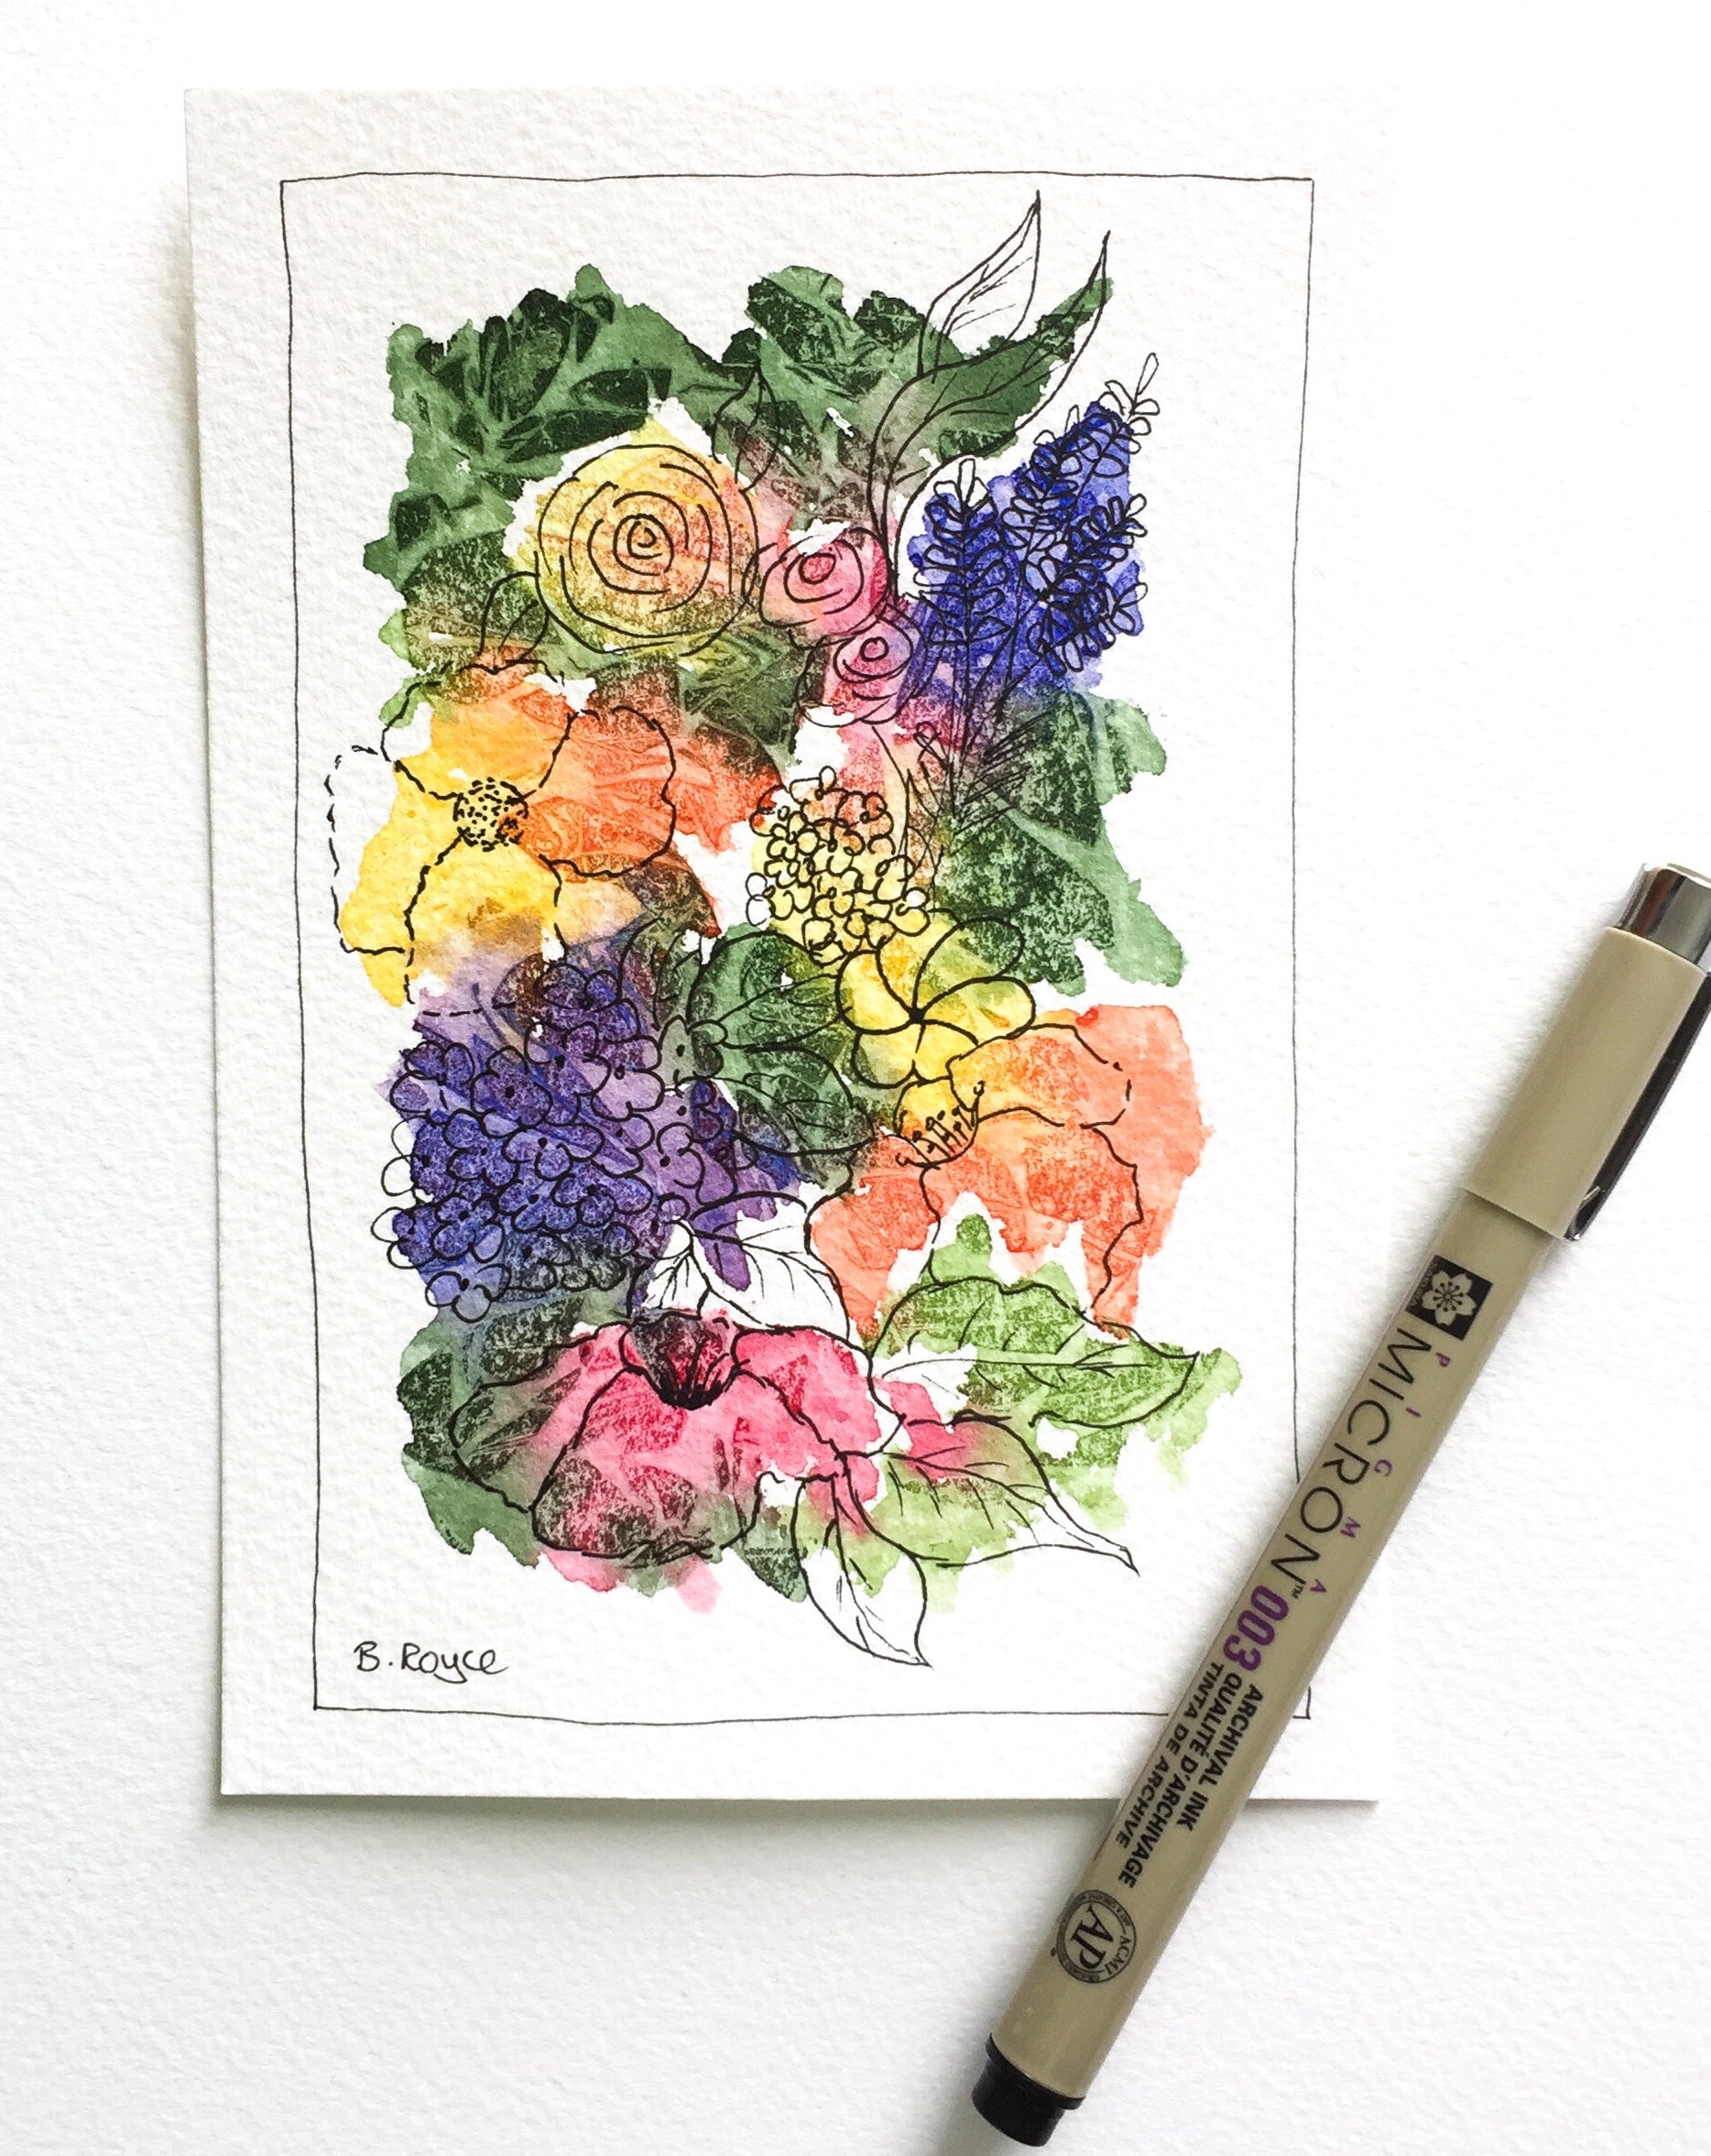 Abstract flowers with ink